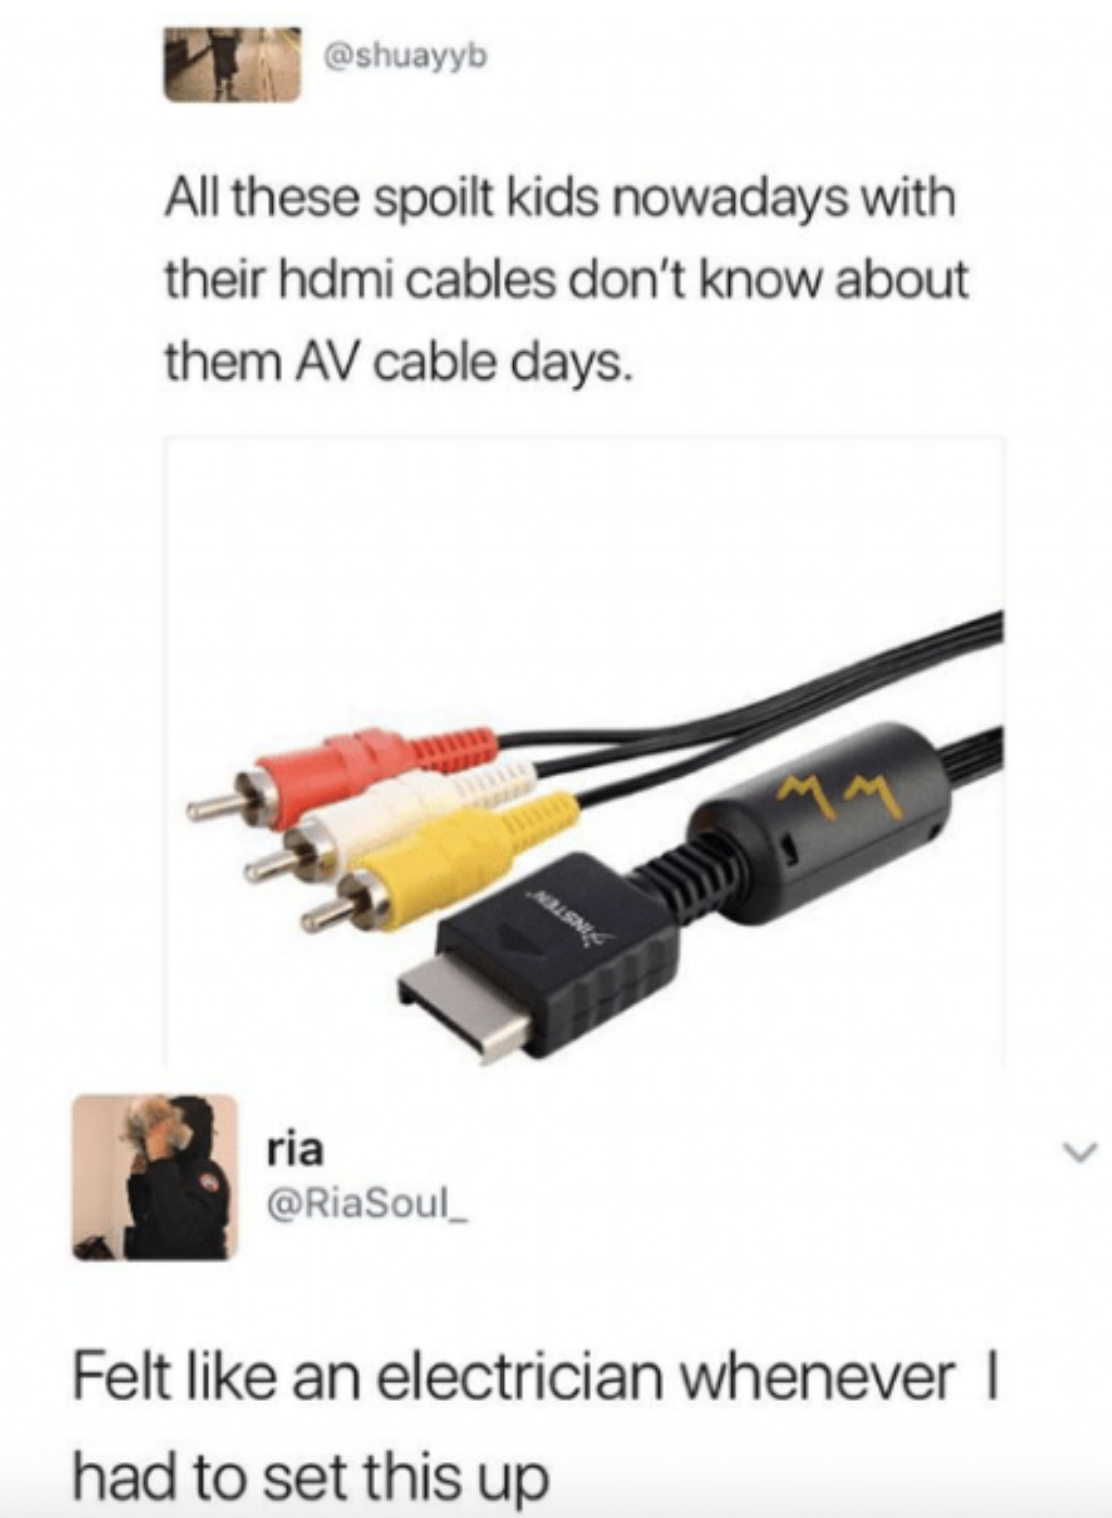 tweet about connecting hdmi cables and how you felt like an electrician